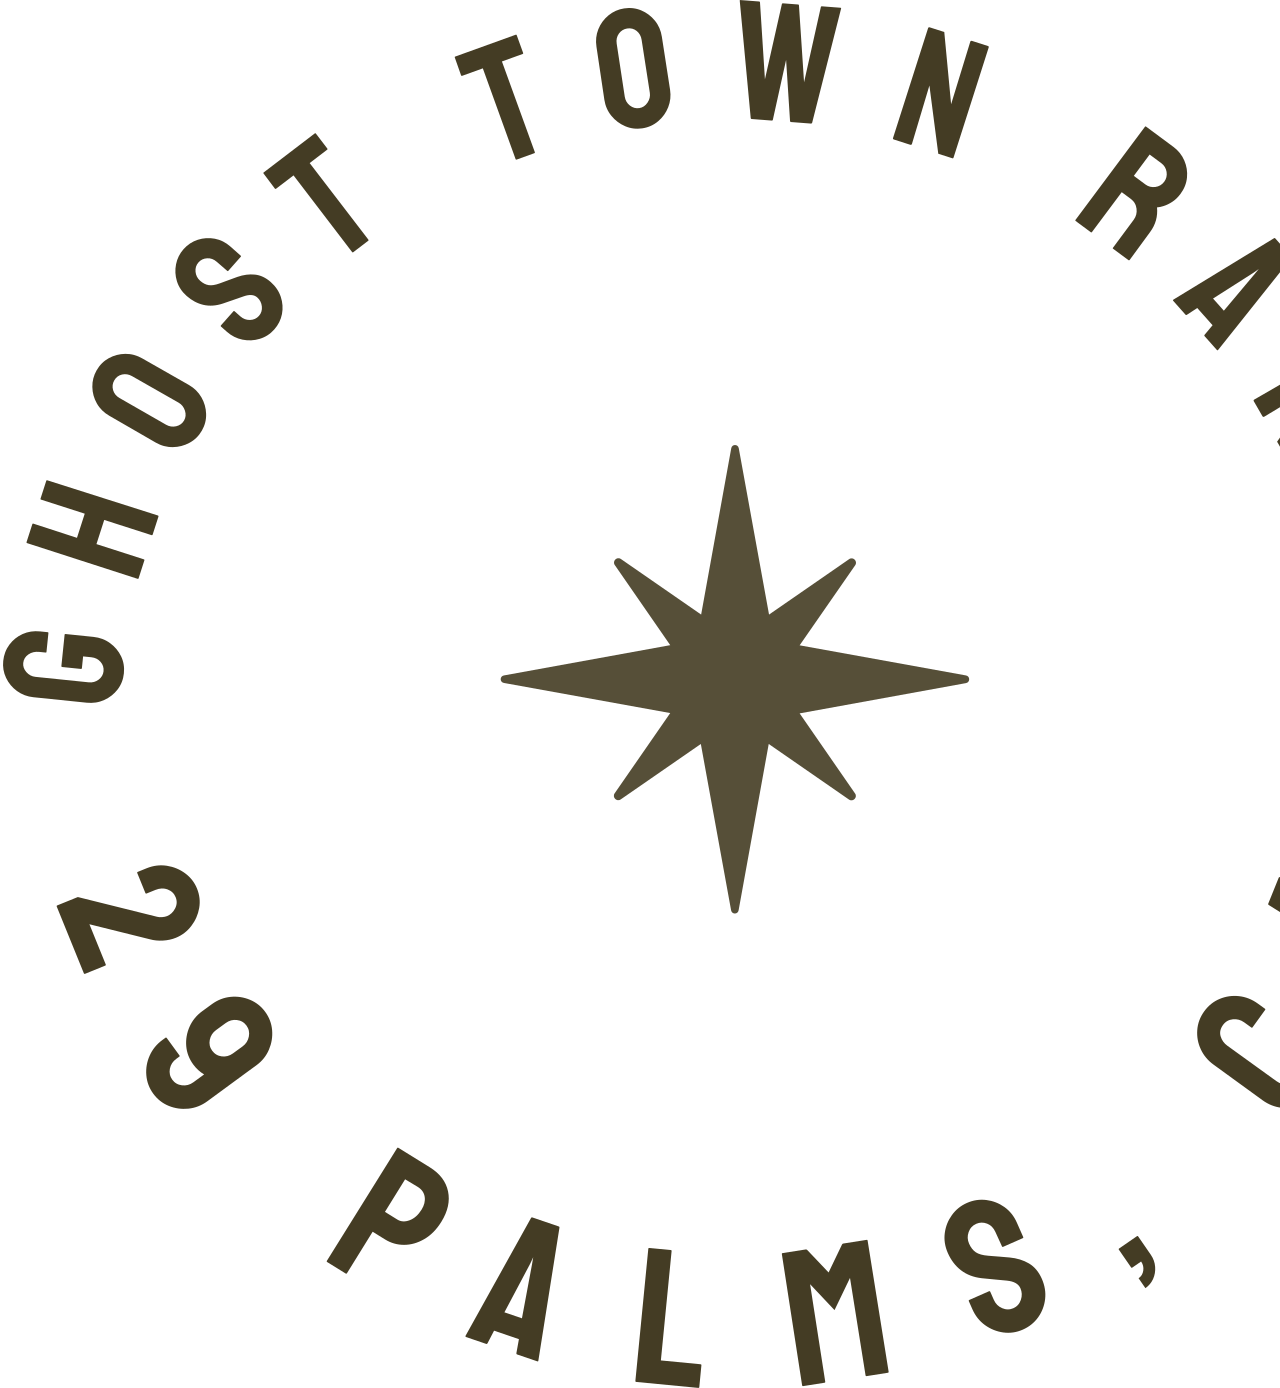 Ghost Town Ranch's logo